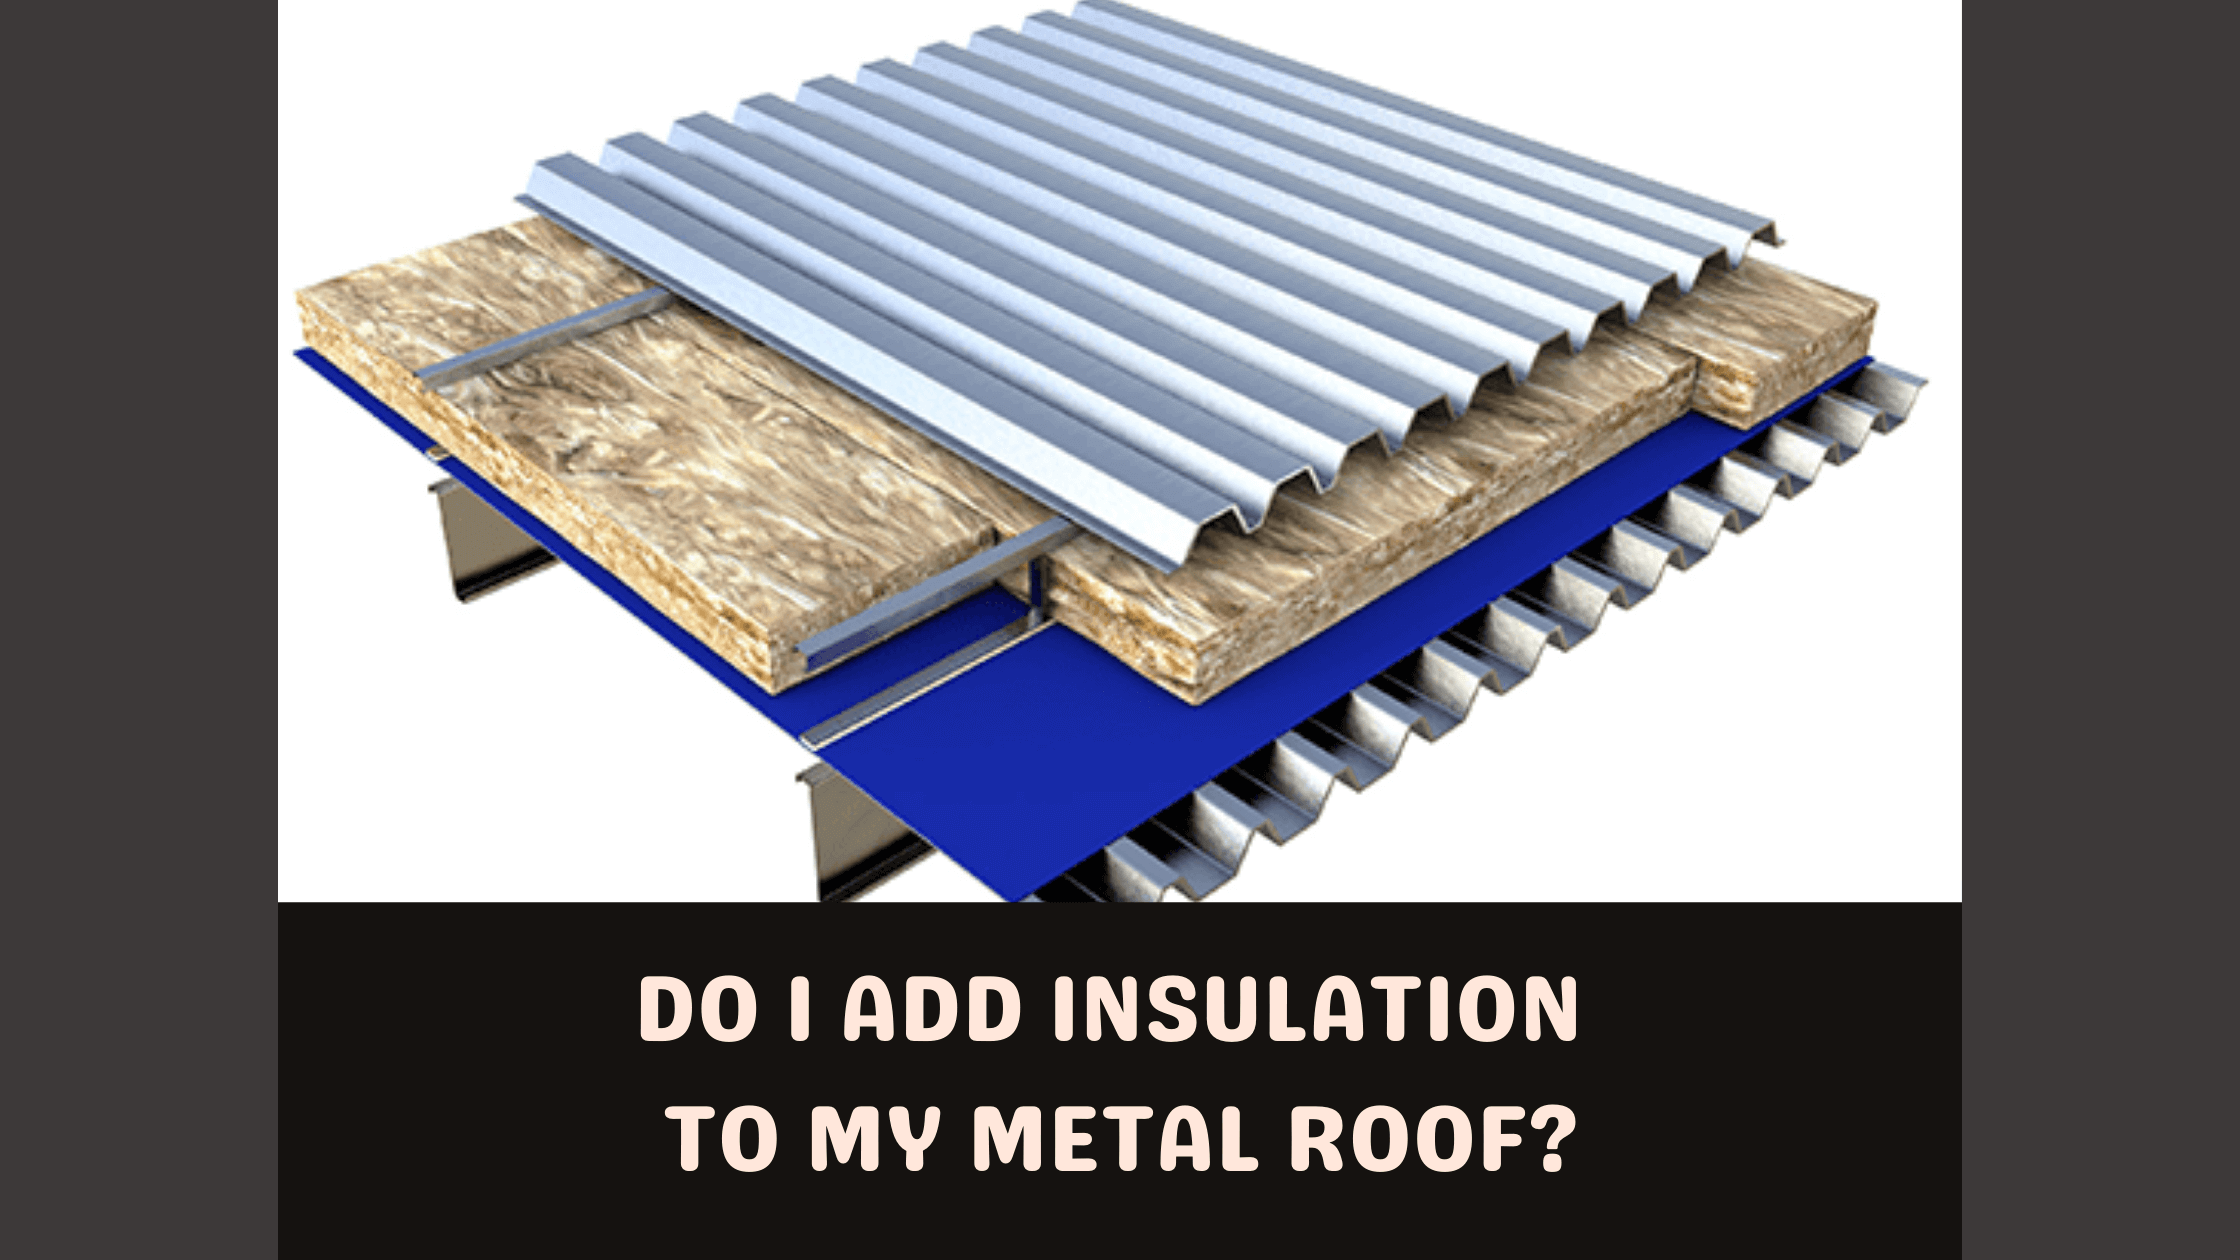 Do I add insulation to my metal roof